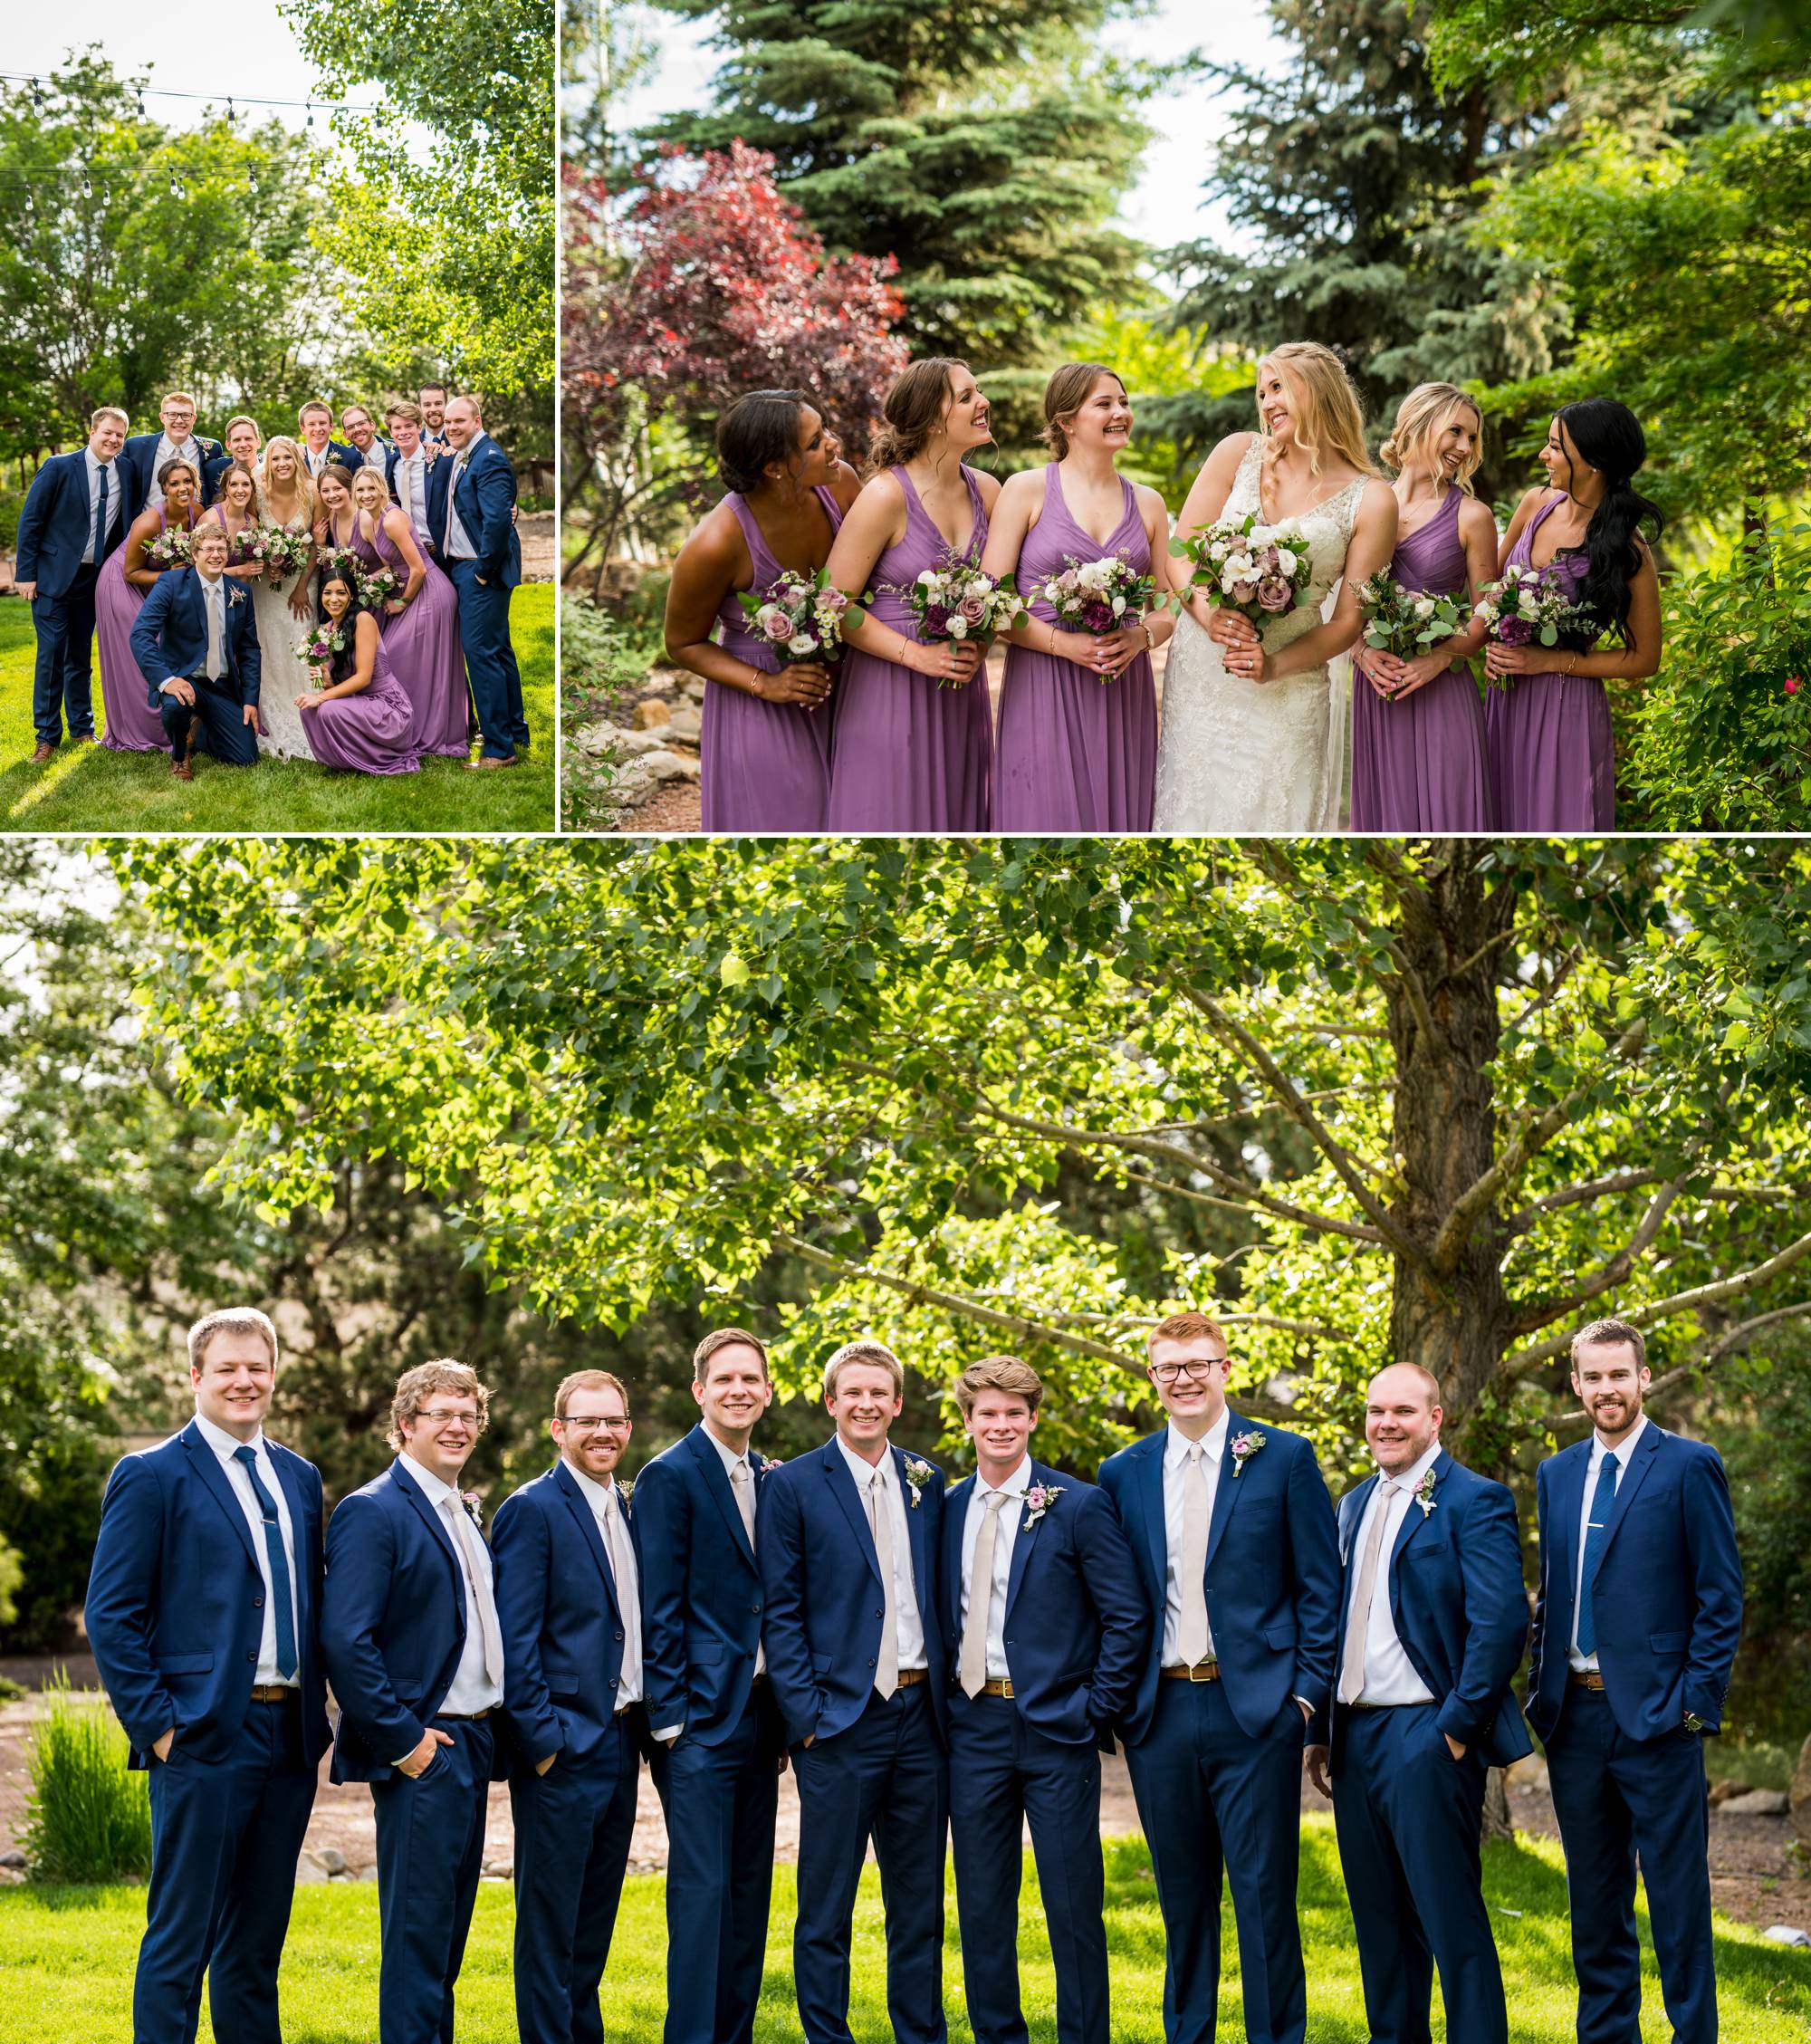 colorful bridal party at church ranch event center